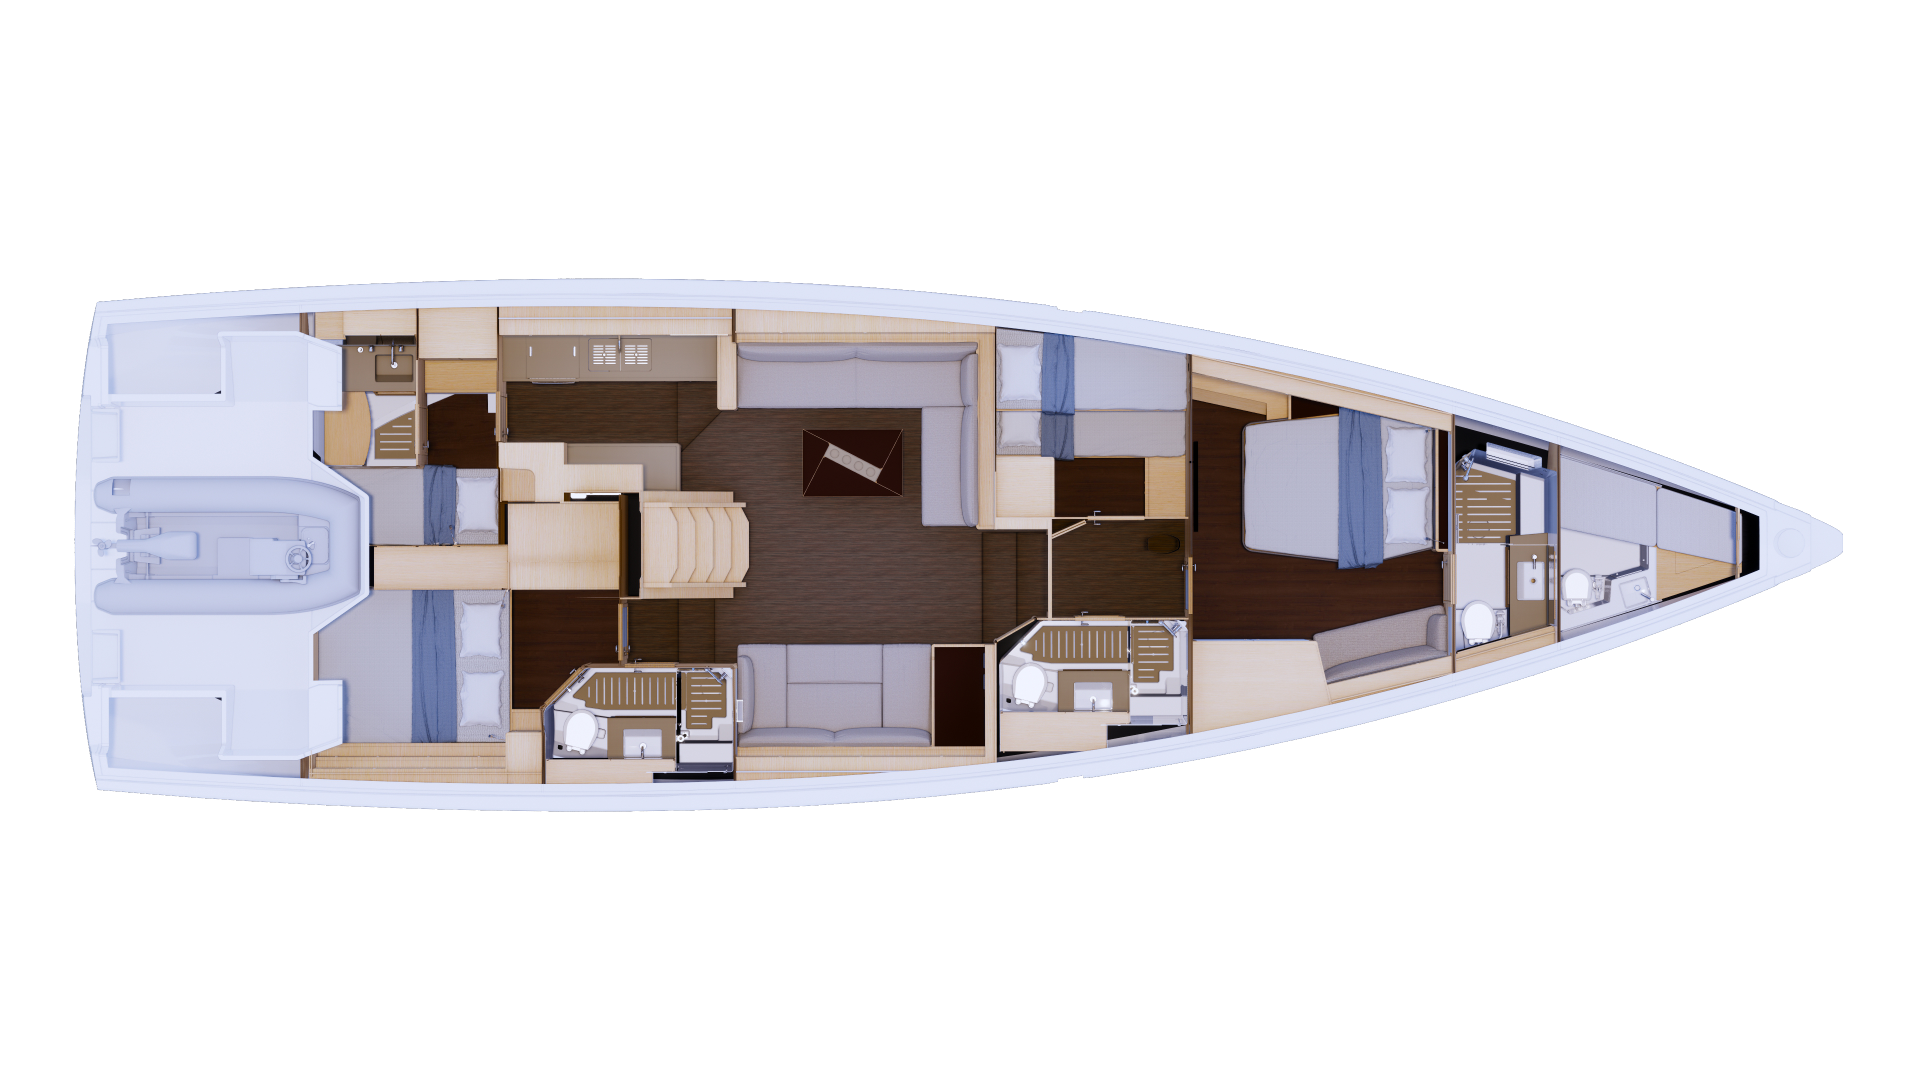 organigramme dufour yachts